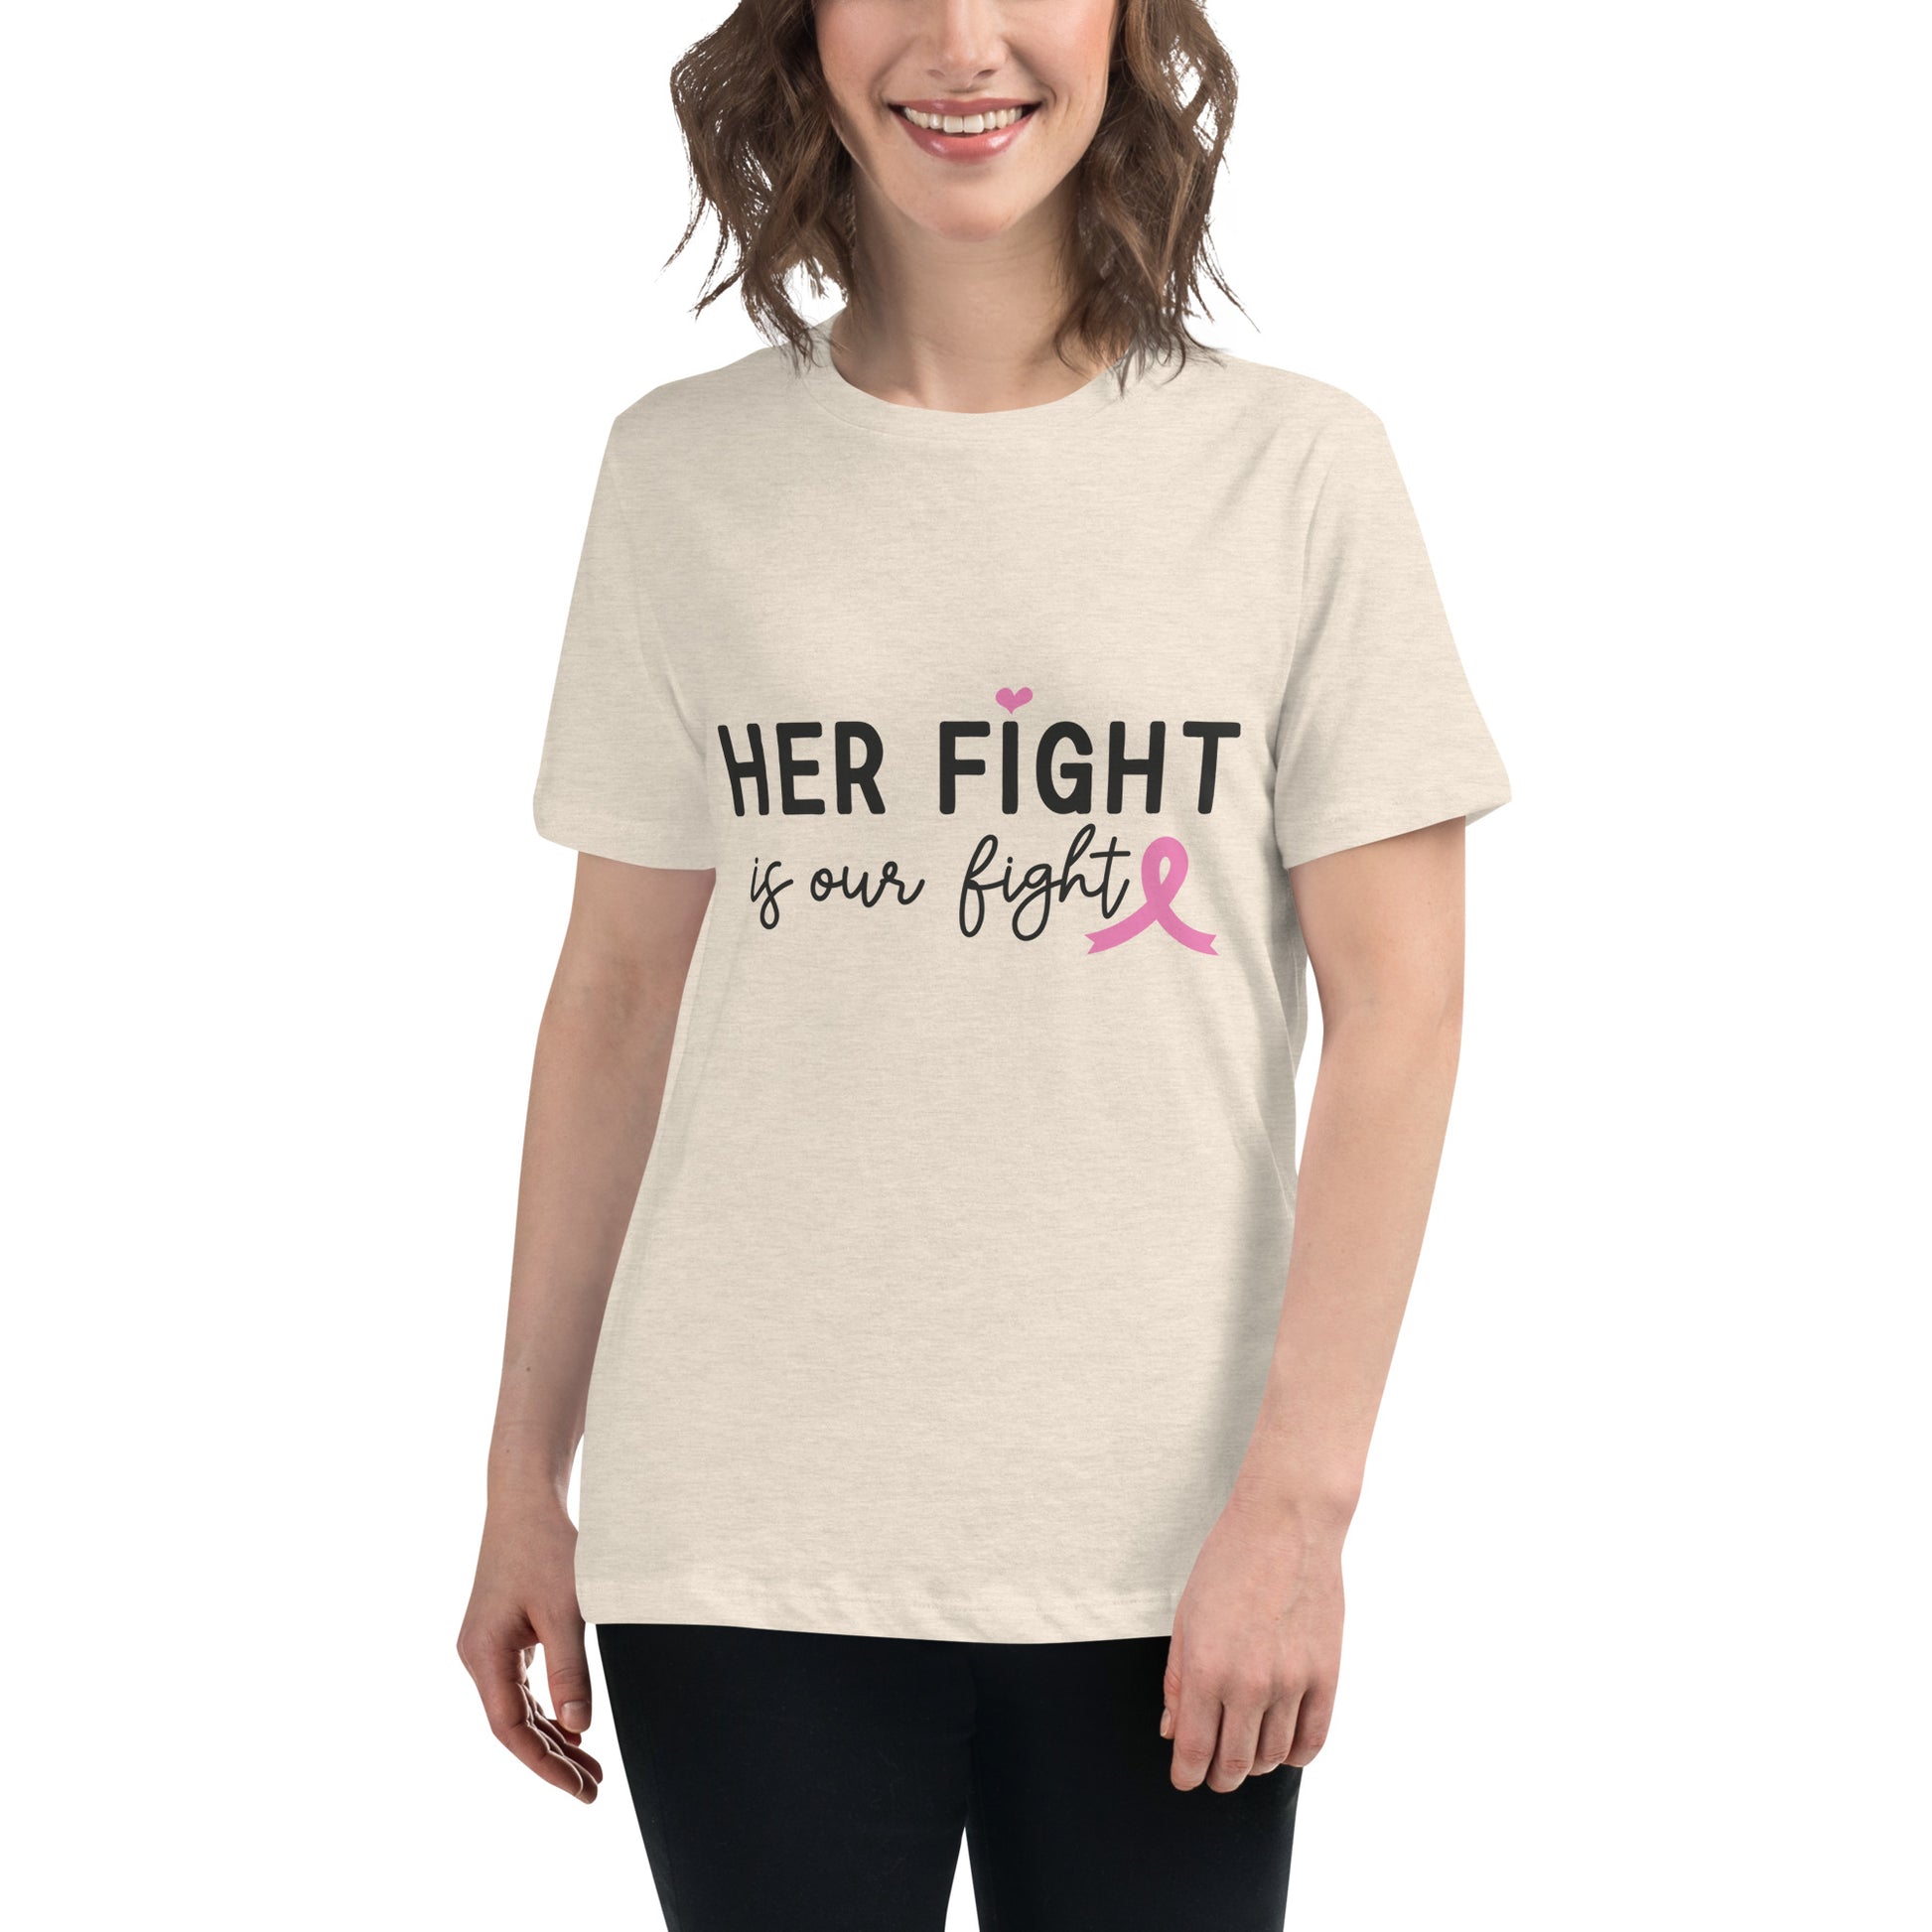 Her Fight is Our Fight Breast Cancer Awareness Women's Relaxed T-Shirt Tee Tshirt